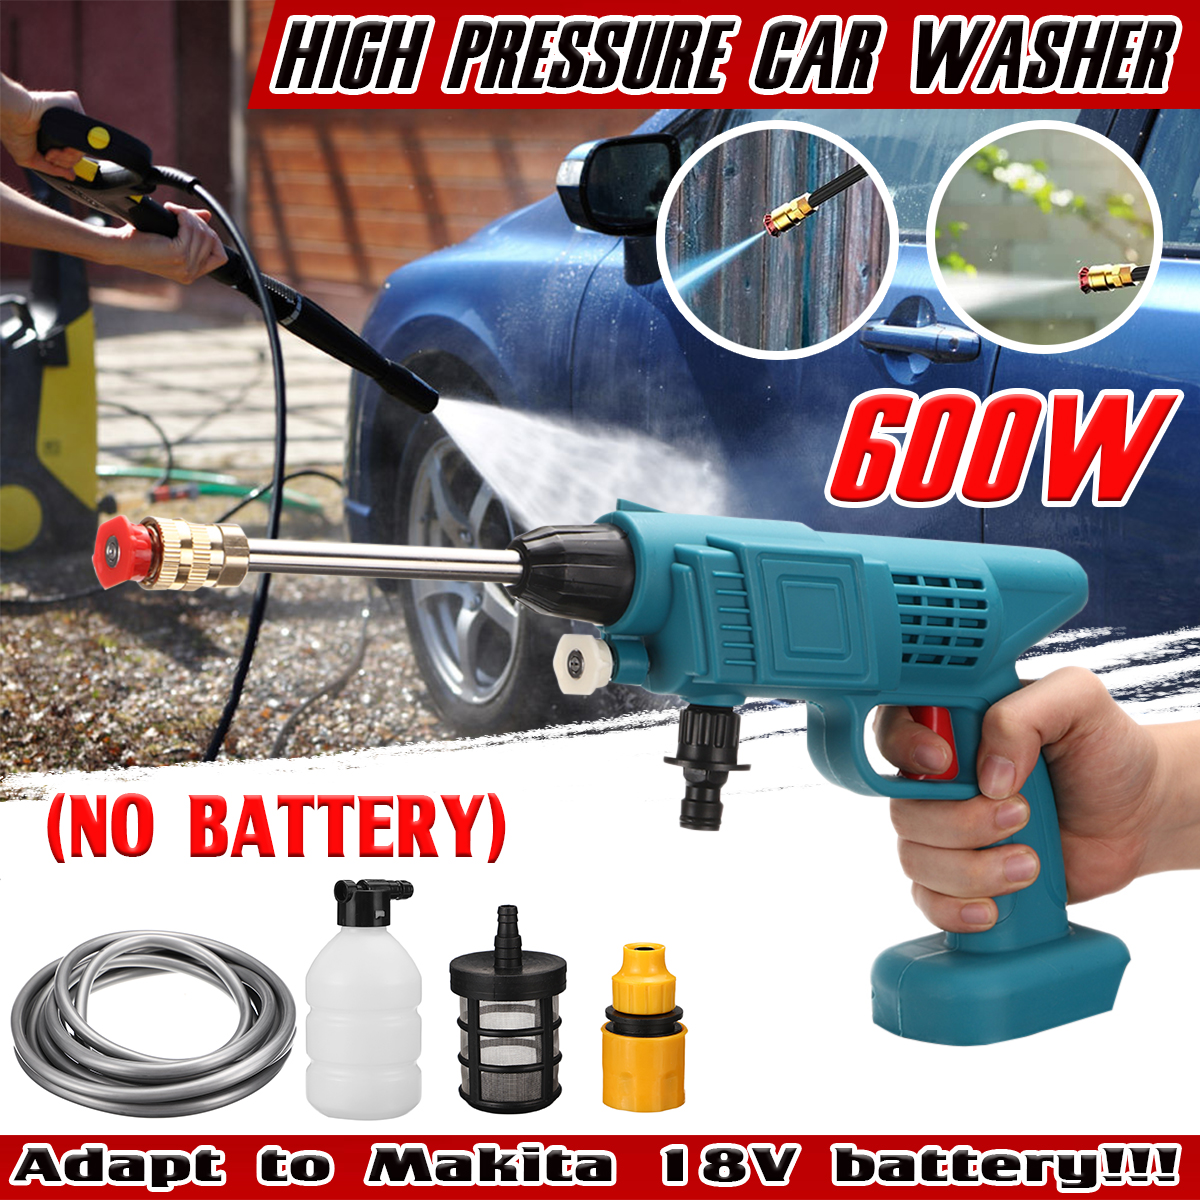 24V-600W-Portable-Cordless-Car-Washer-High-Pressure-Car-Household-Washer-Cleaner-Spray-Guns-Pumps-To-1901471-1